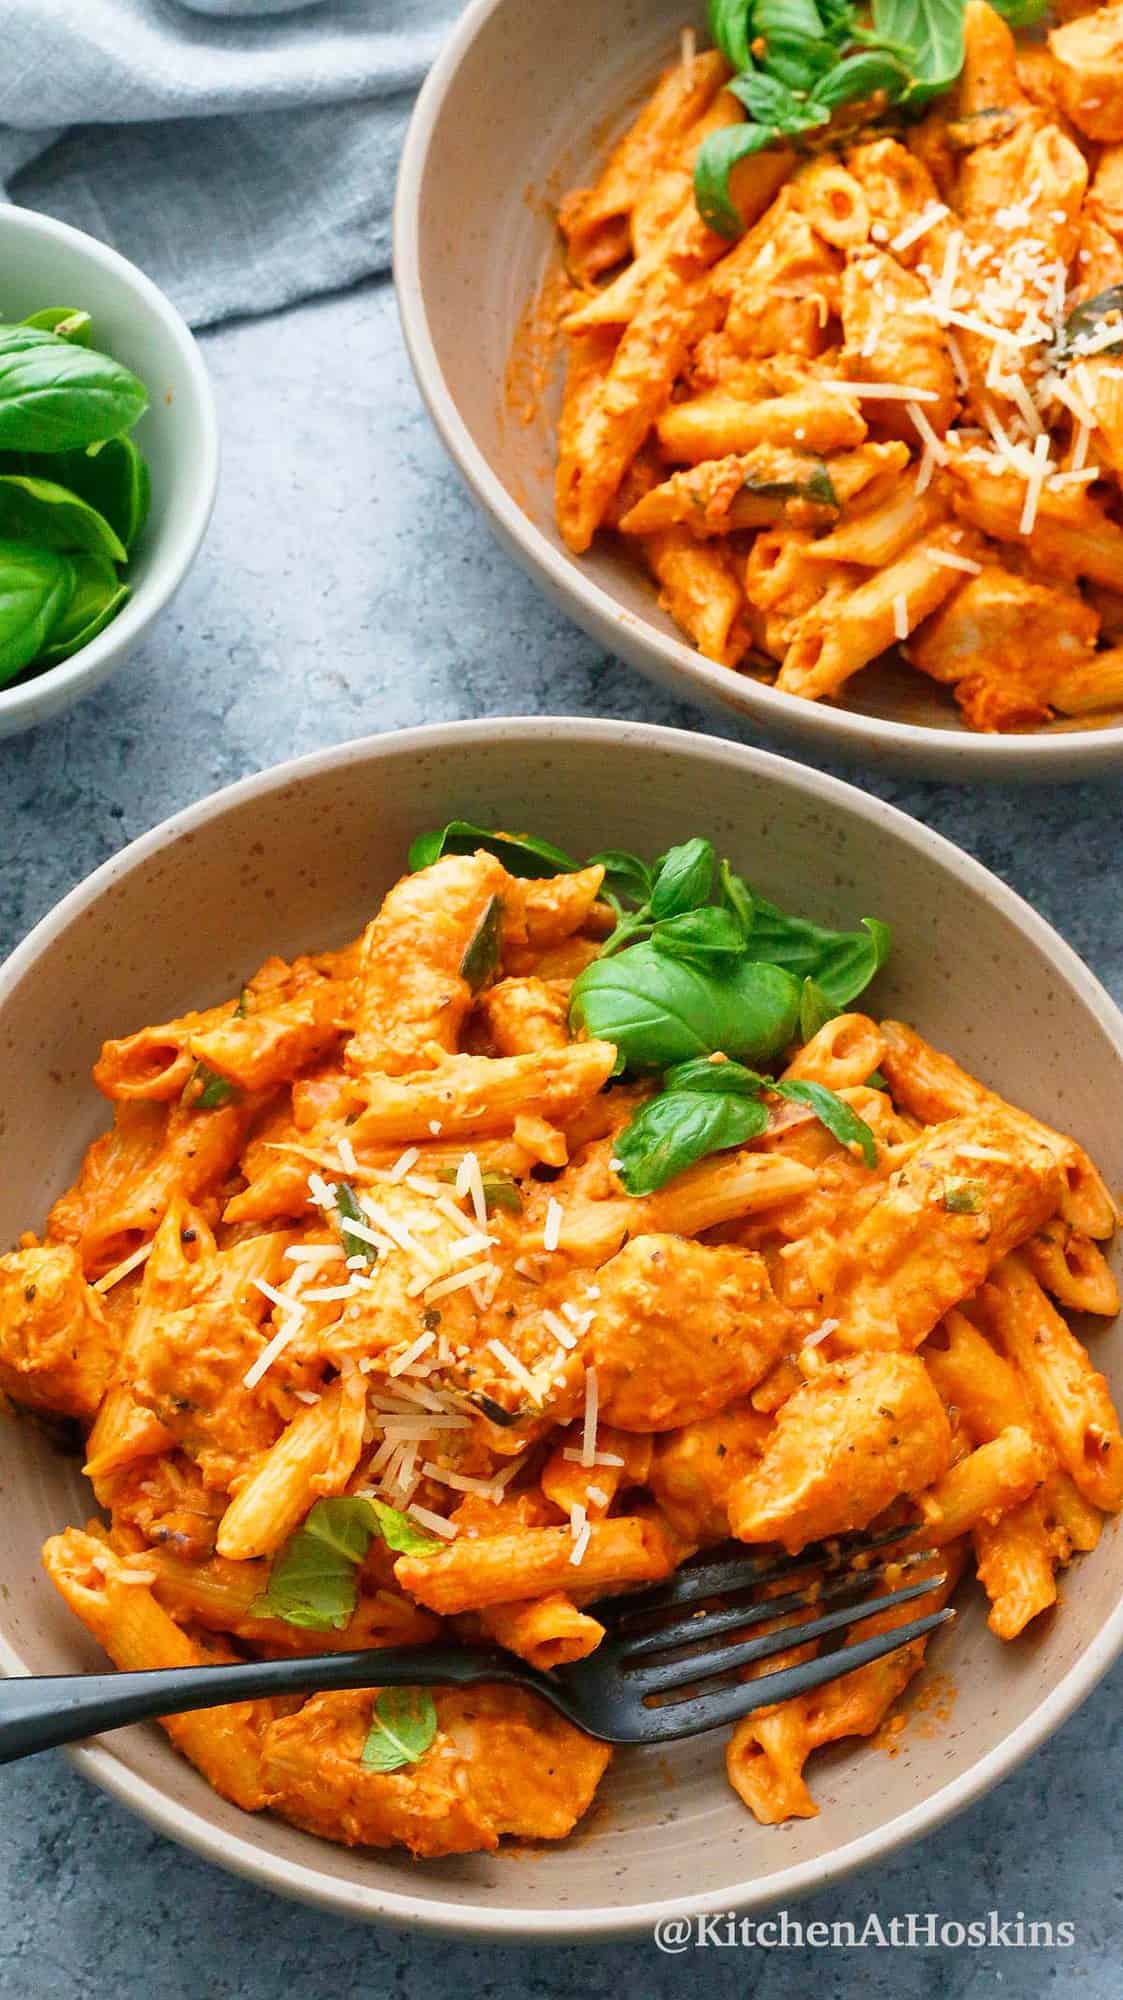 chicken penne all vodka served in bowls and garnished with basil.